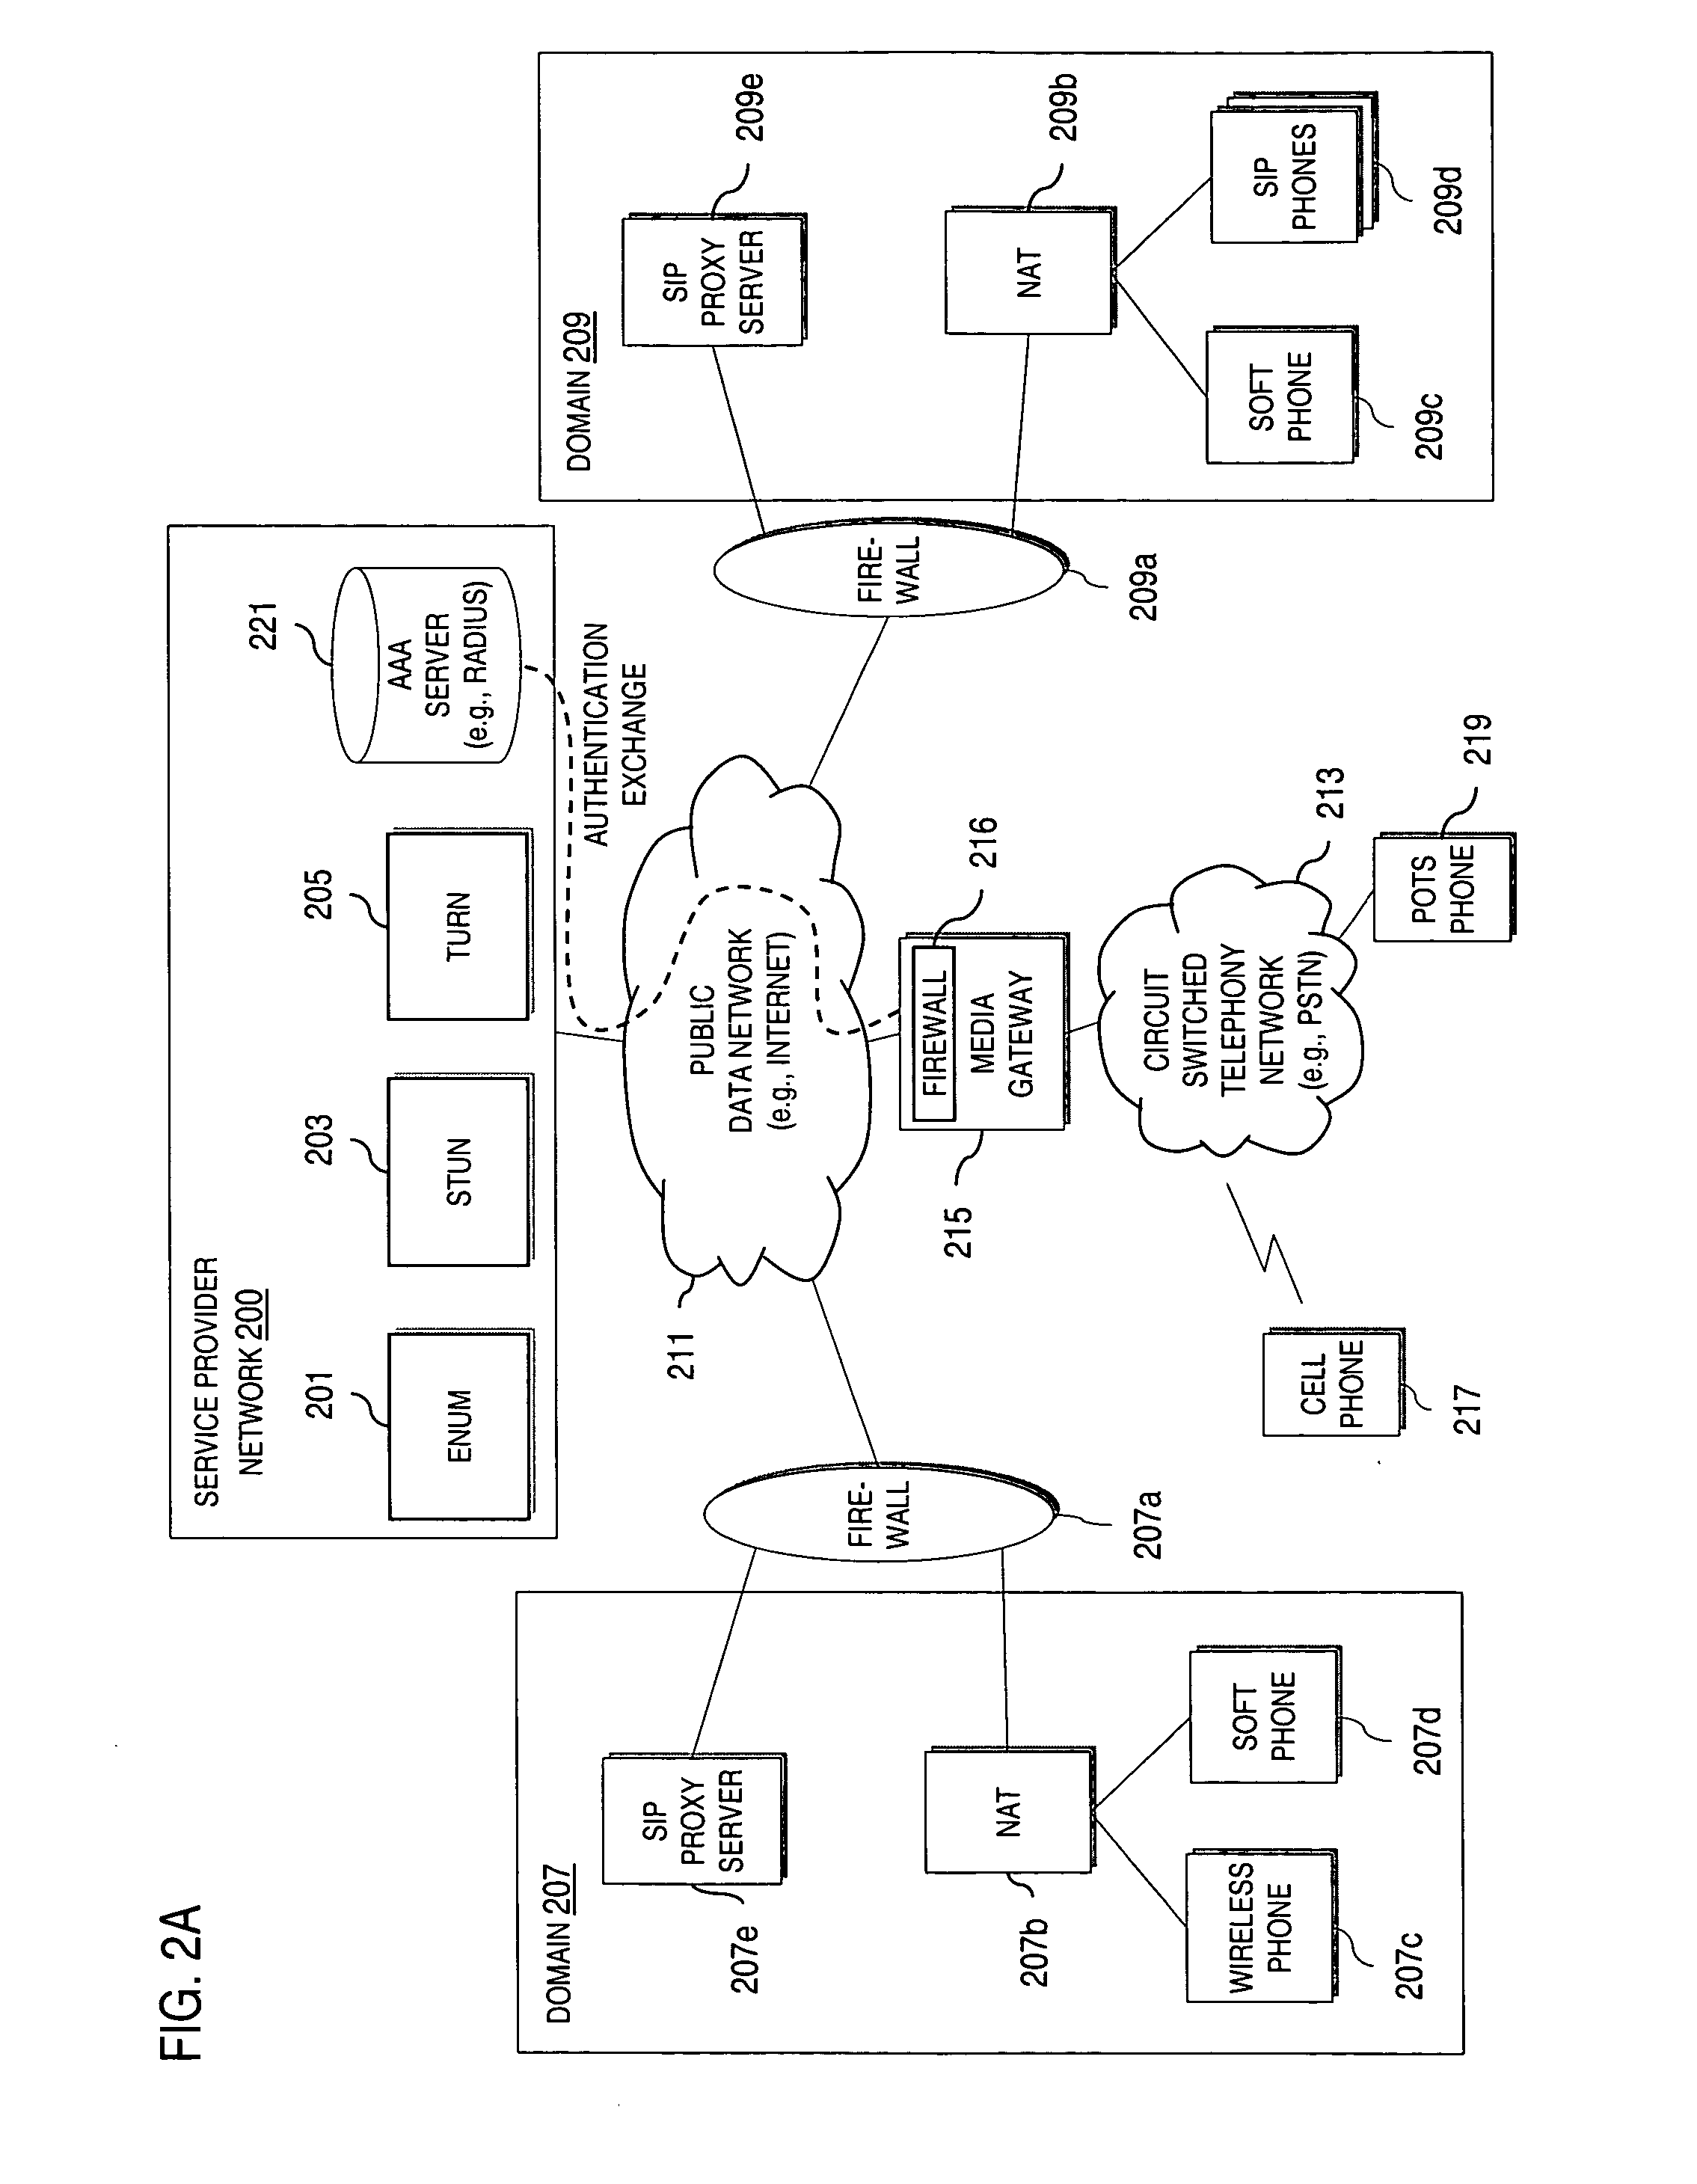 Method and system for providing secure media gateways to support interdomain traversal